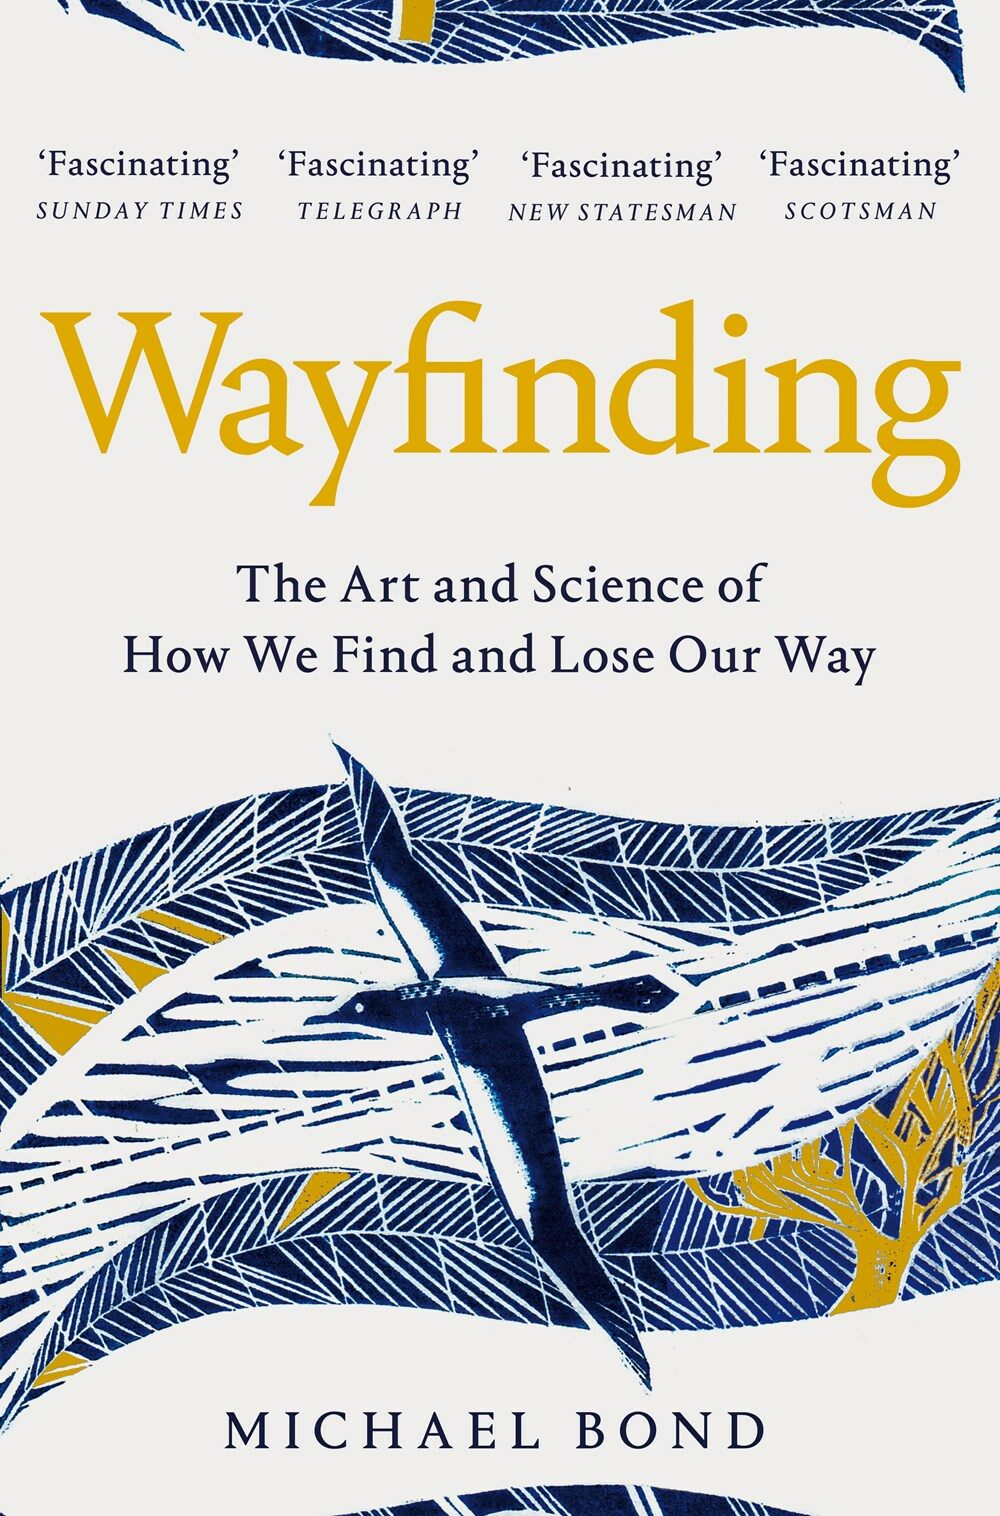 Wayfinding : The Art and Science of How We Find and Lose Our Way (Paperback)